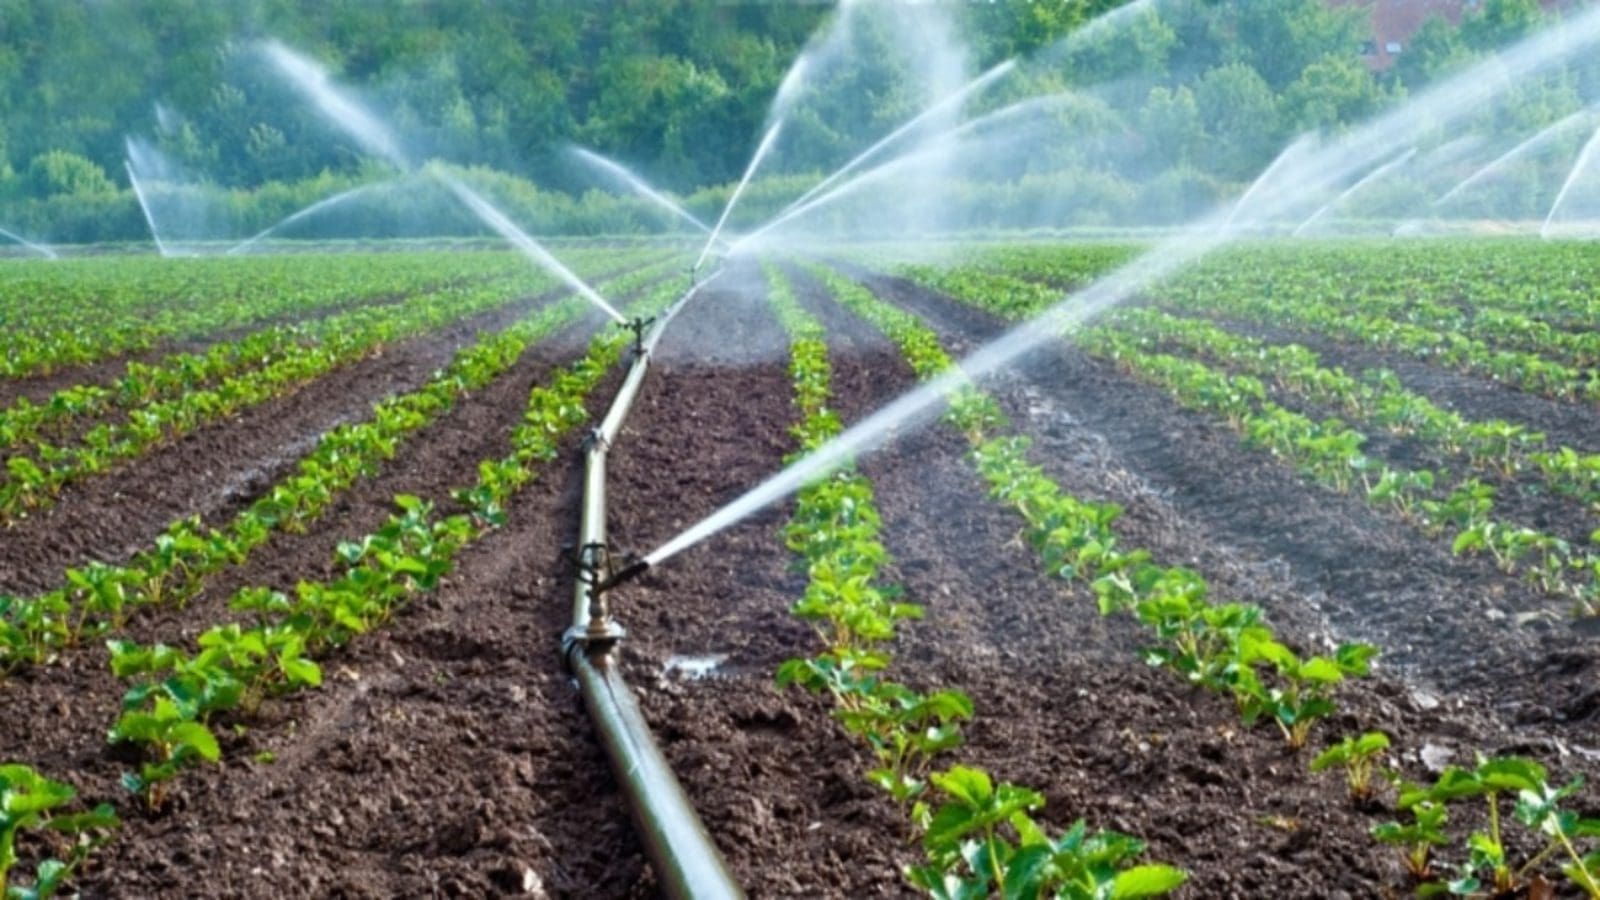 World Bank grants Kenya US$120m to boost irrigation strategy as many African governments race to end rain-fed agricultural system